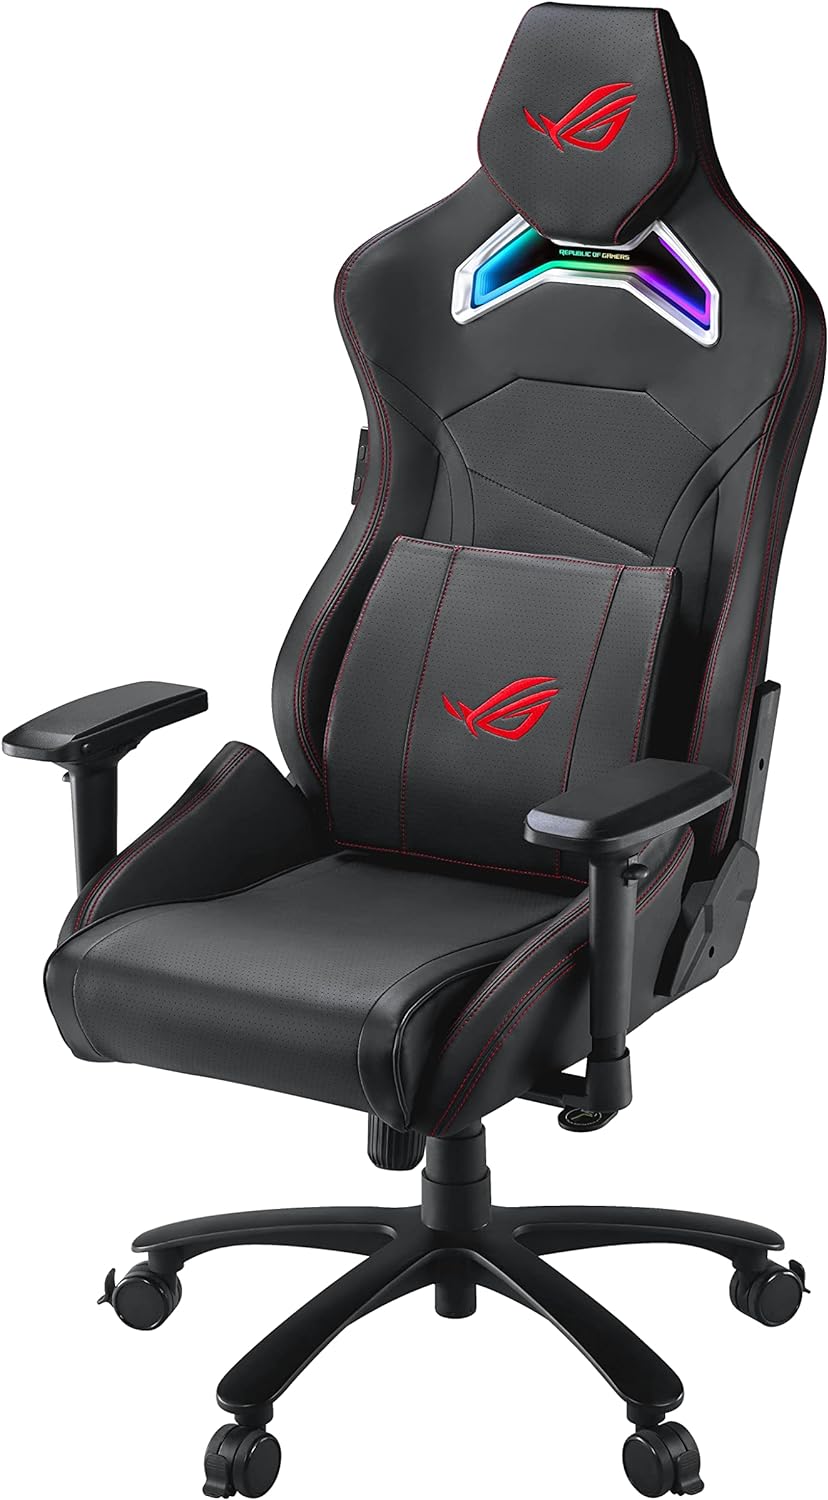 ASUS Gaming Chair with RGB Lights - Enhance your gaming environment with intuitive Aura RGB color effects. 4718017322782D